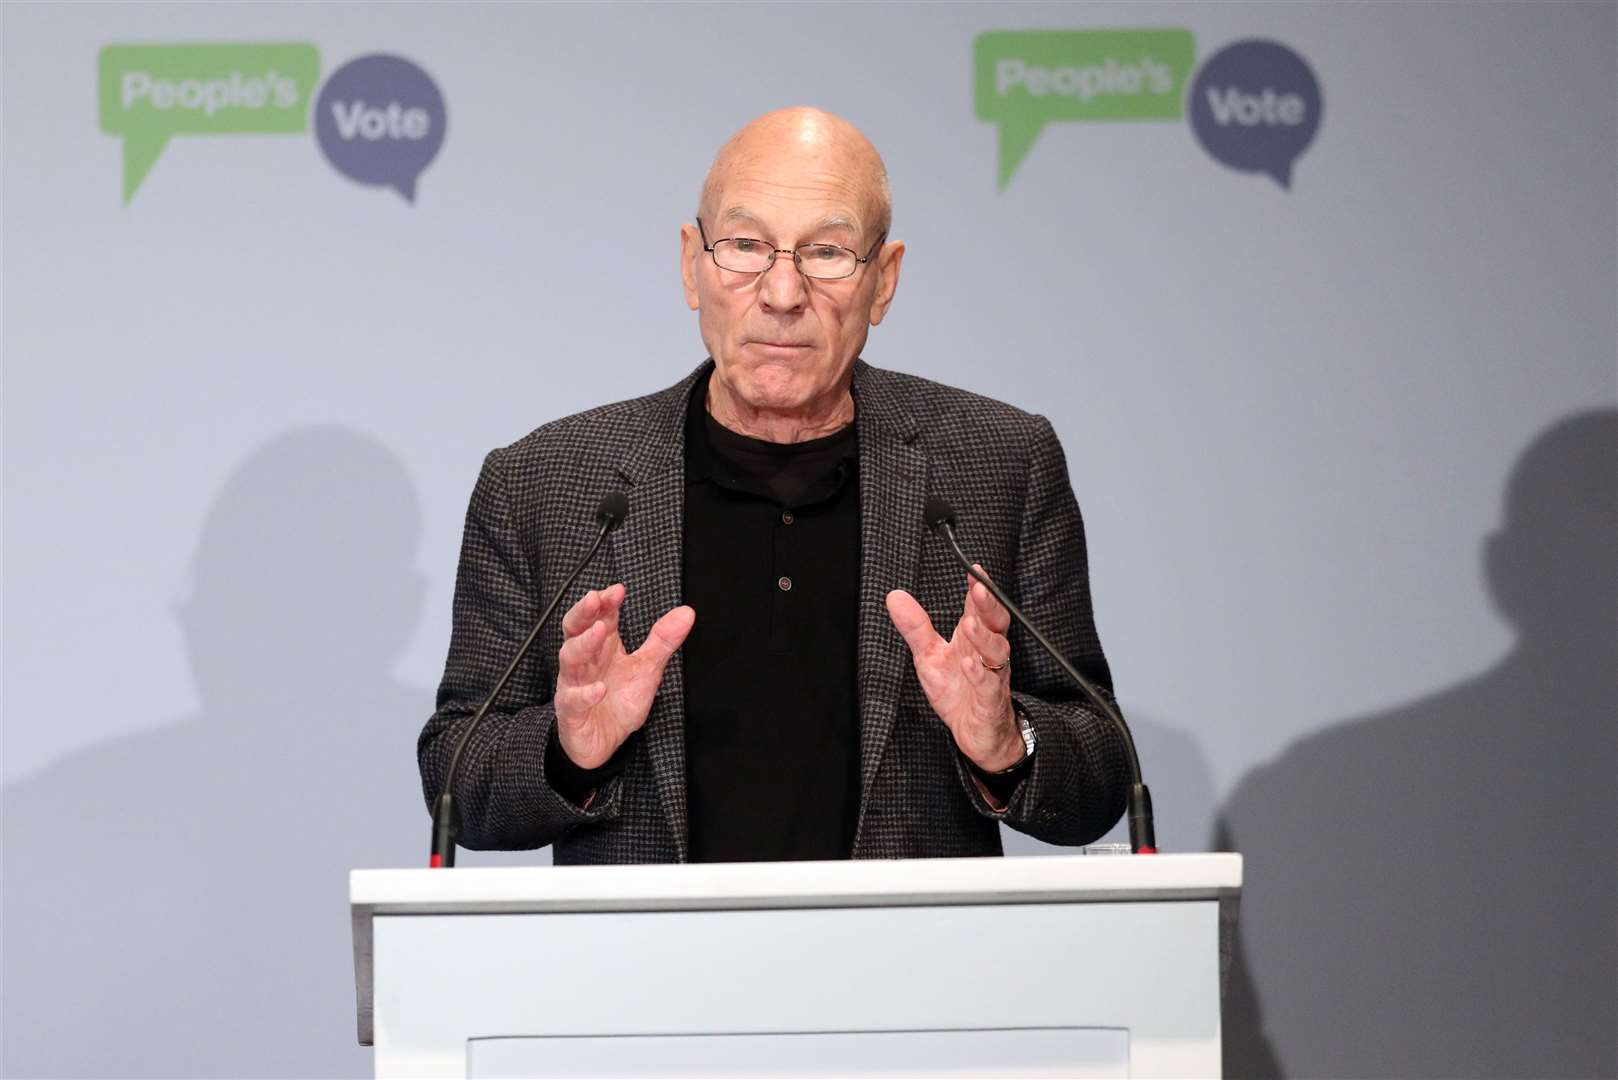 Sir Patrick Stewart addresses the crowd during the People’s Vote campaign launch on Brexit (Jonathan Brady/PA)